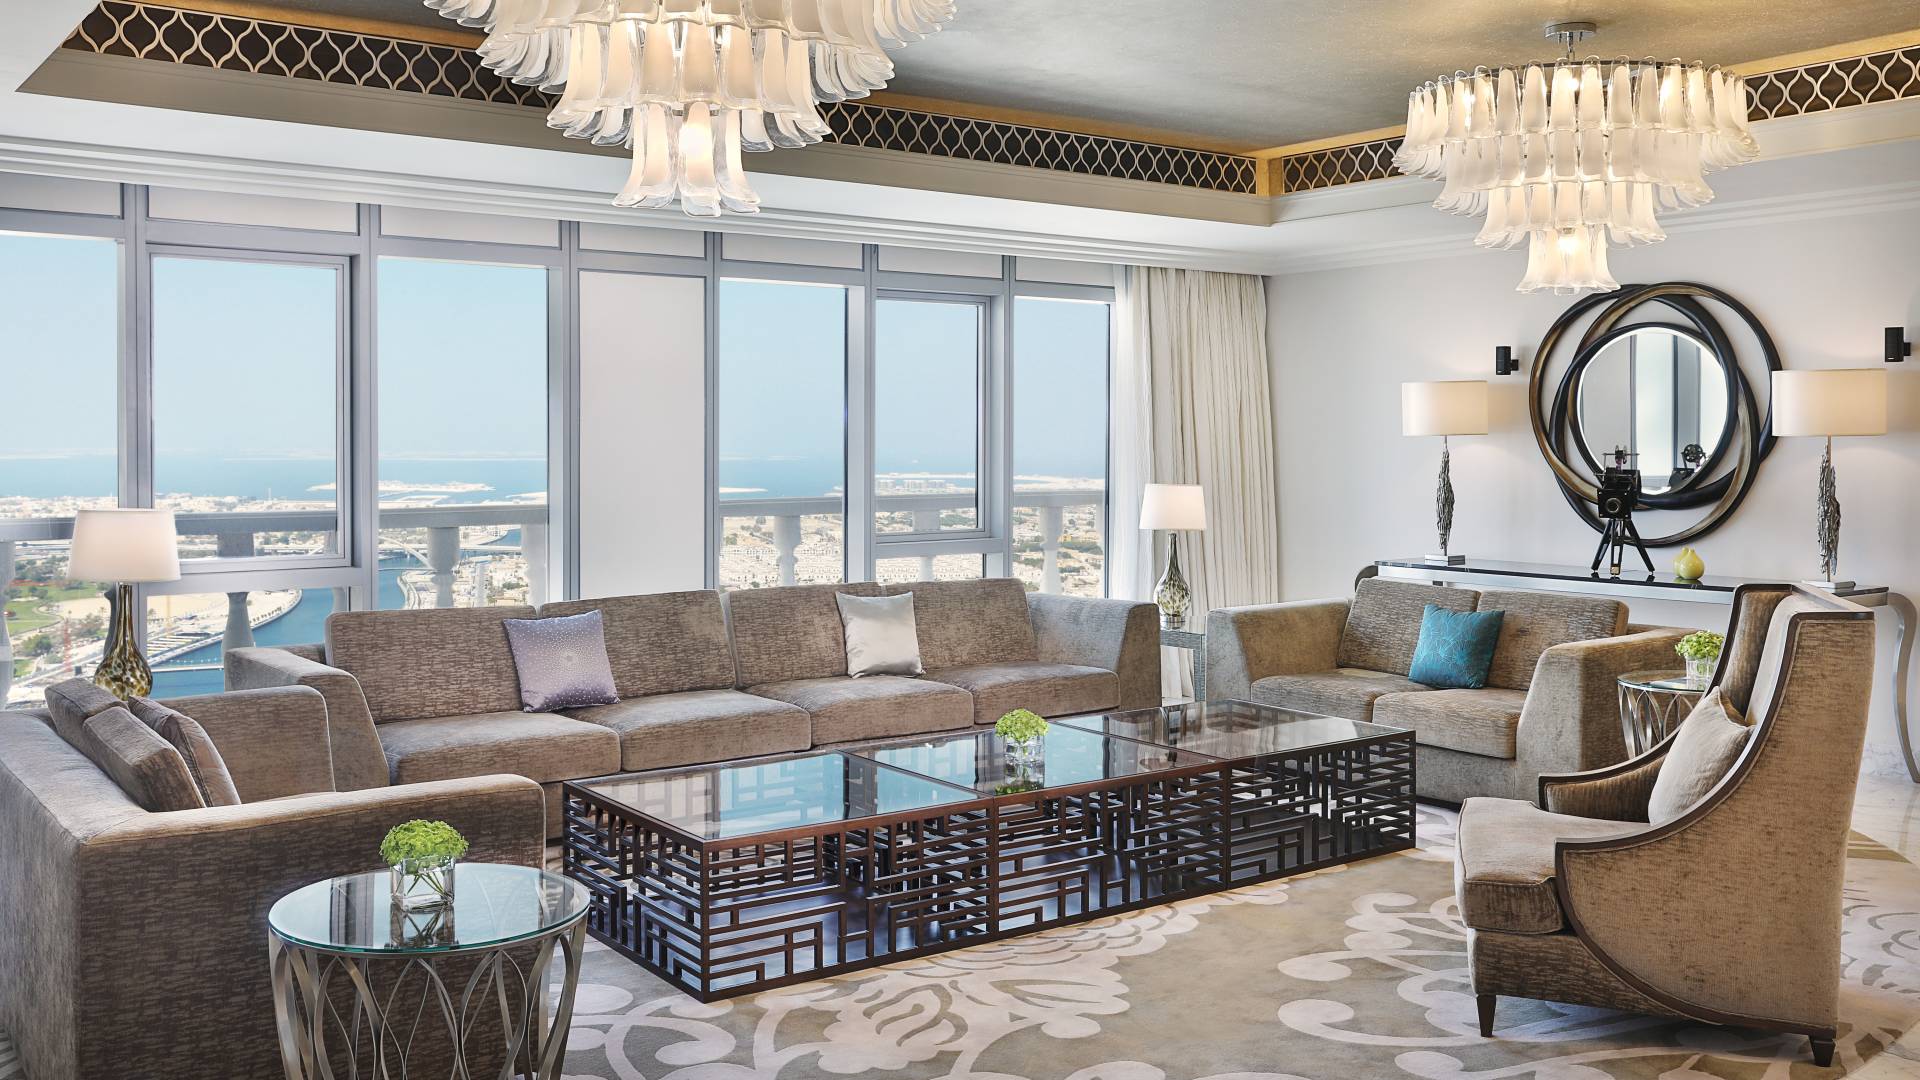 Presidential Suite Lounge Area with Elegant Lighting Fixtures and Modern Decor